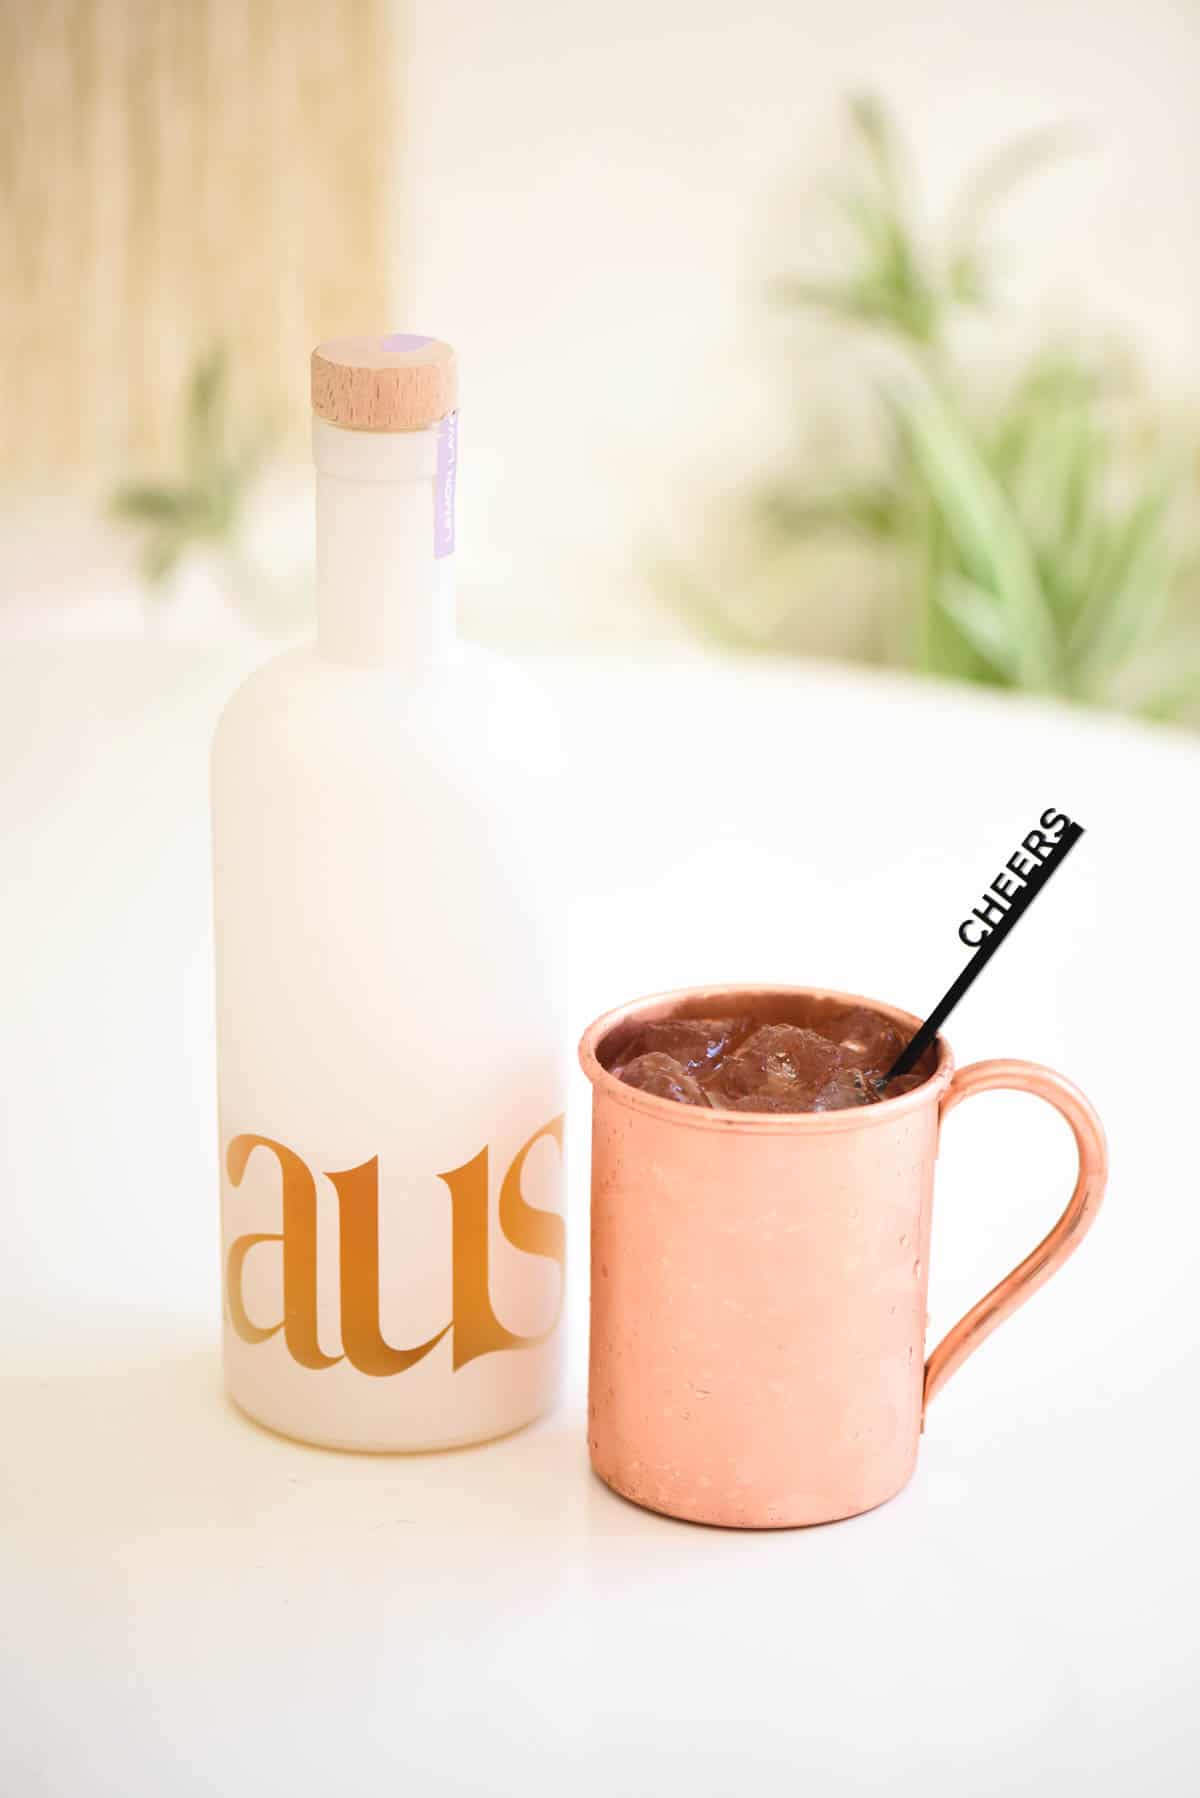 A bottle of Lemon Lavender Haus on a table next to a copper Moscow Mule mug.